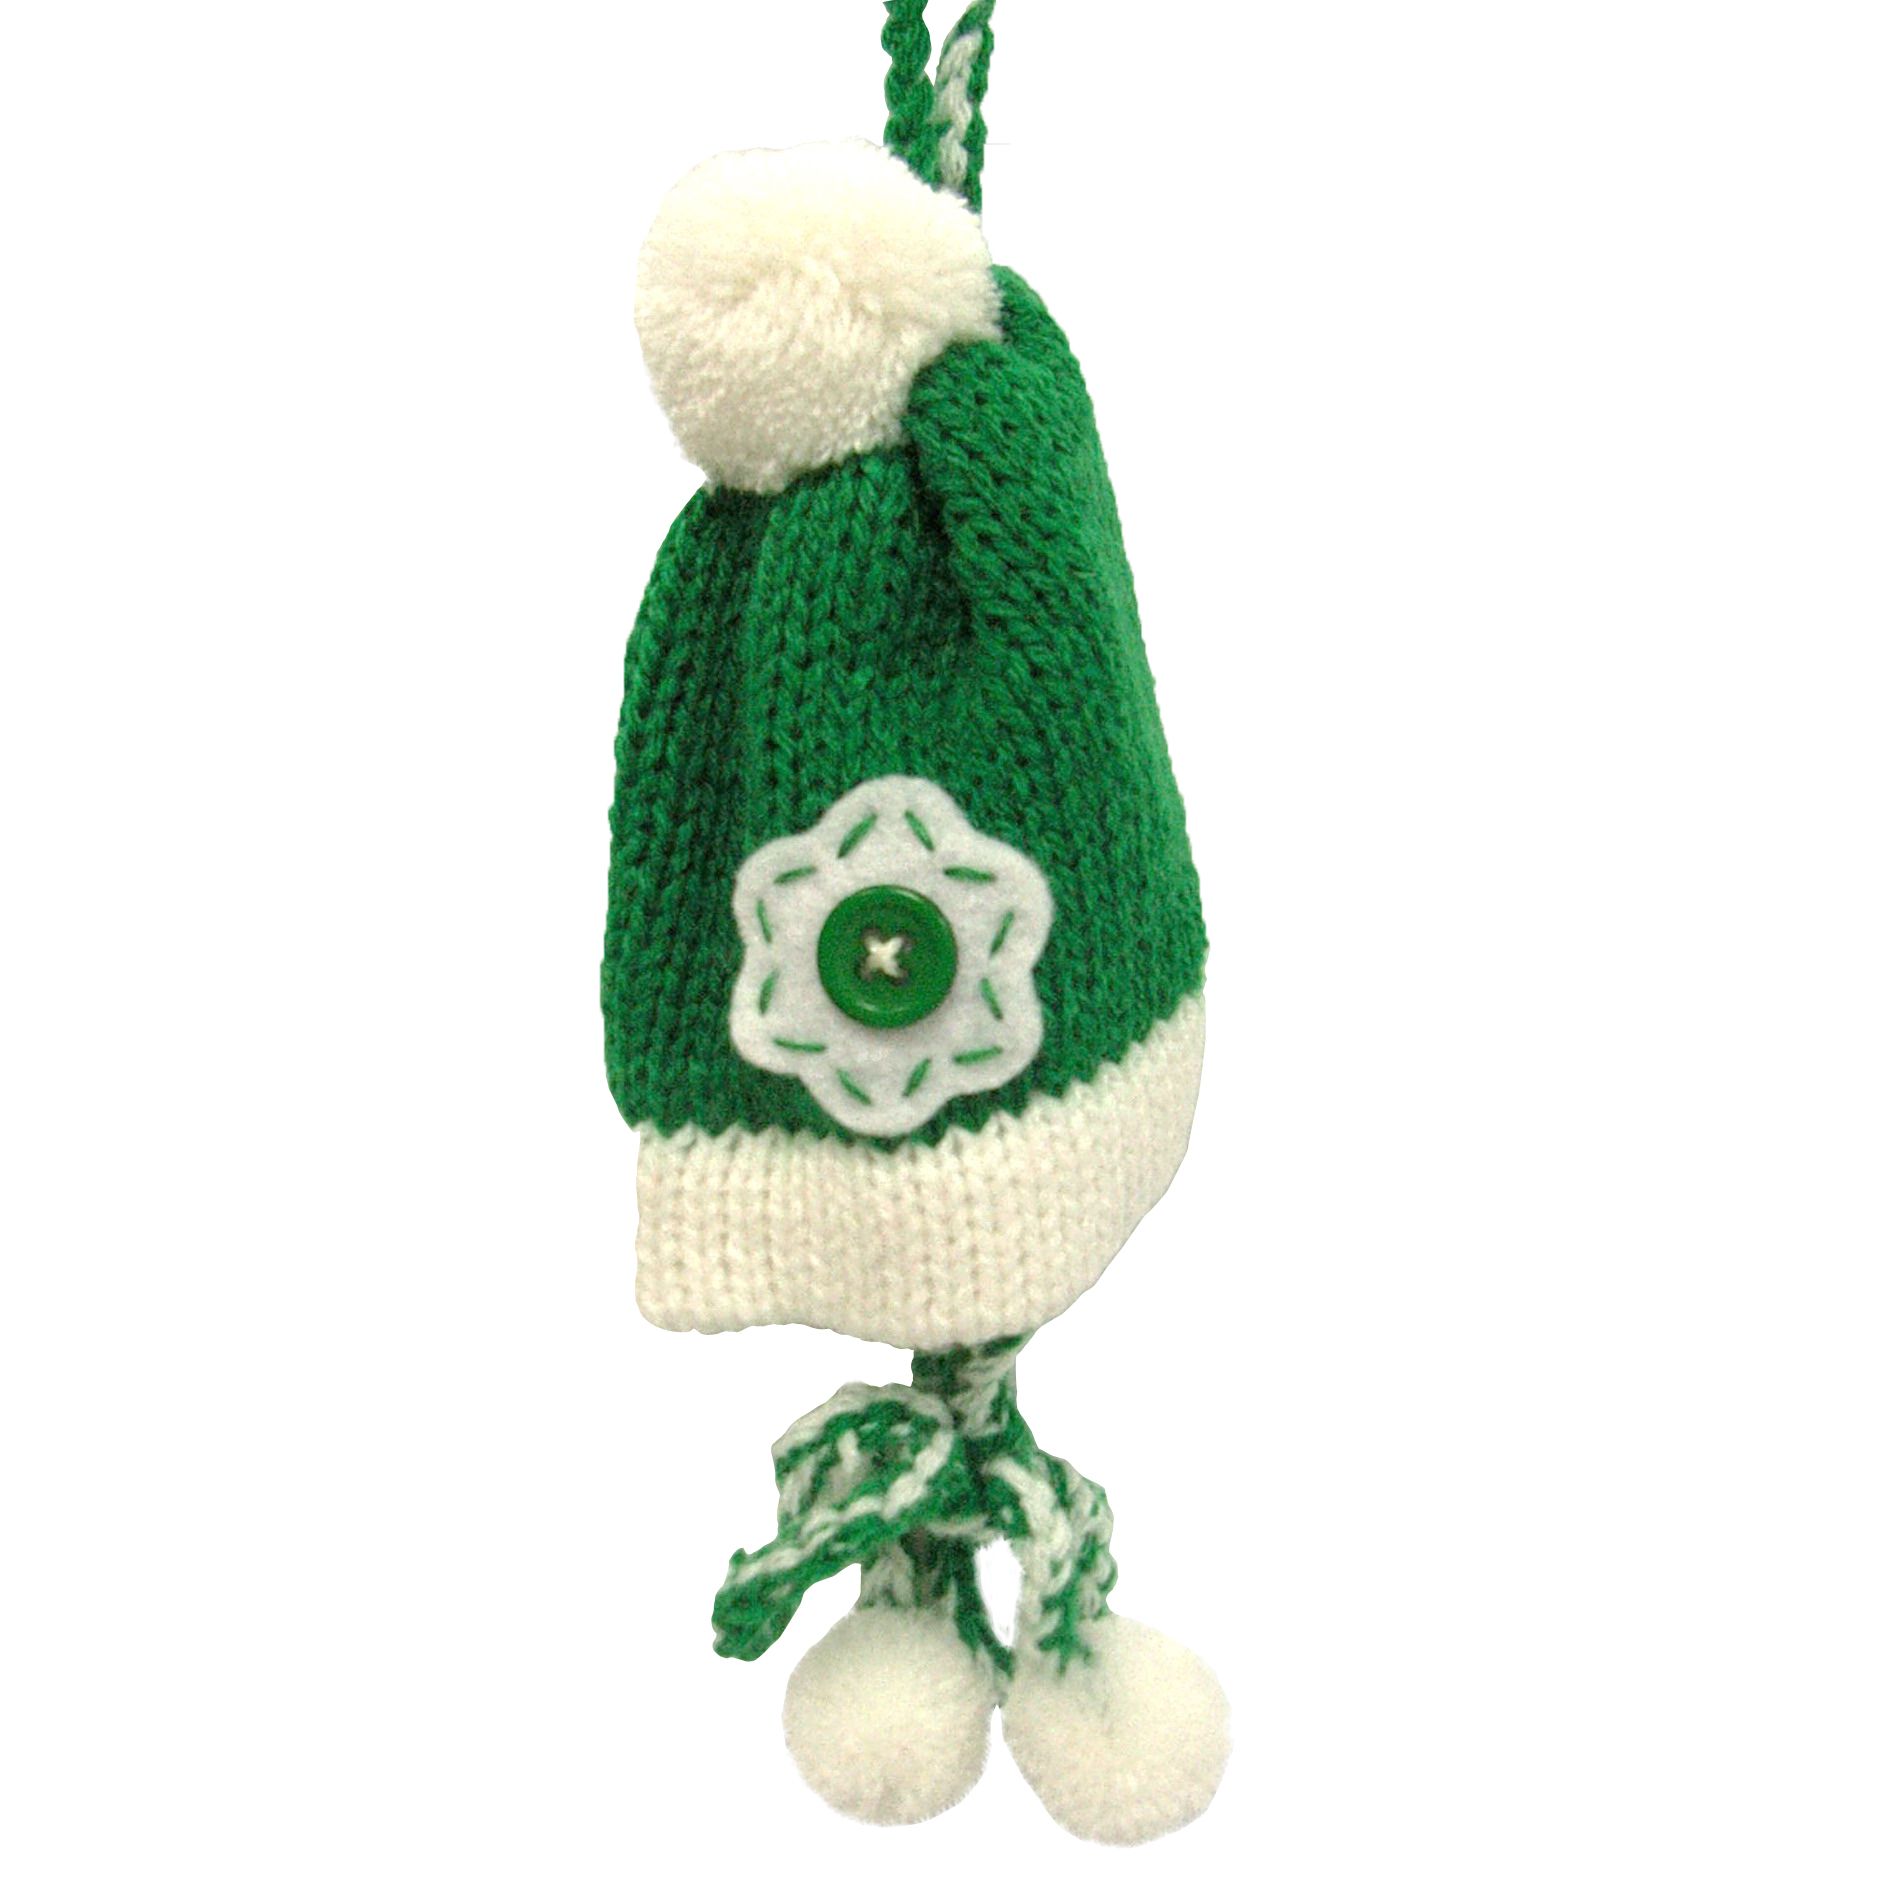 Country Living Homespun Holiday Knitted Hat Ornament - Green